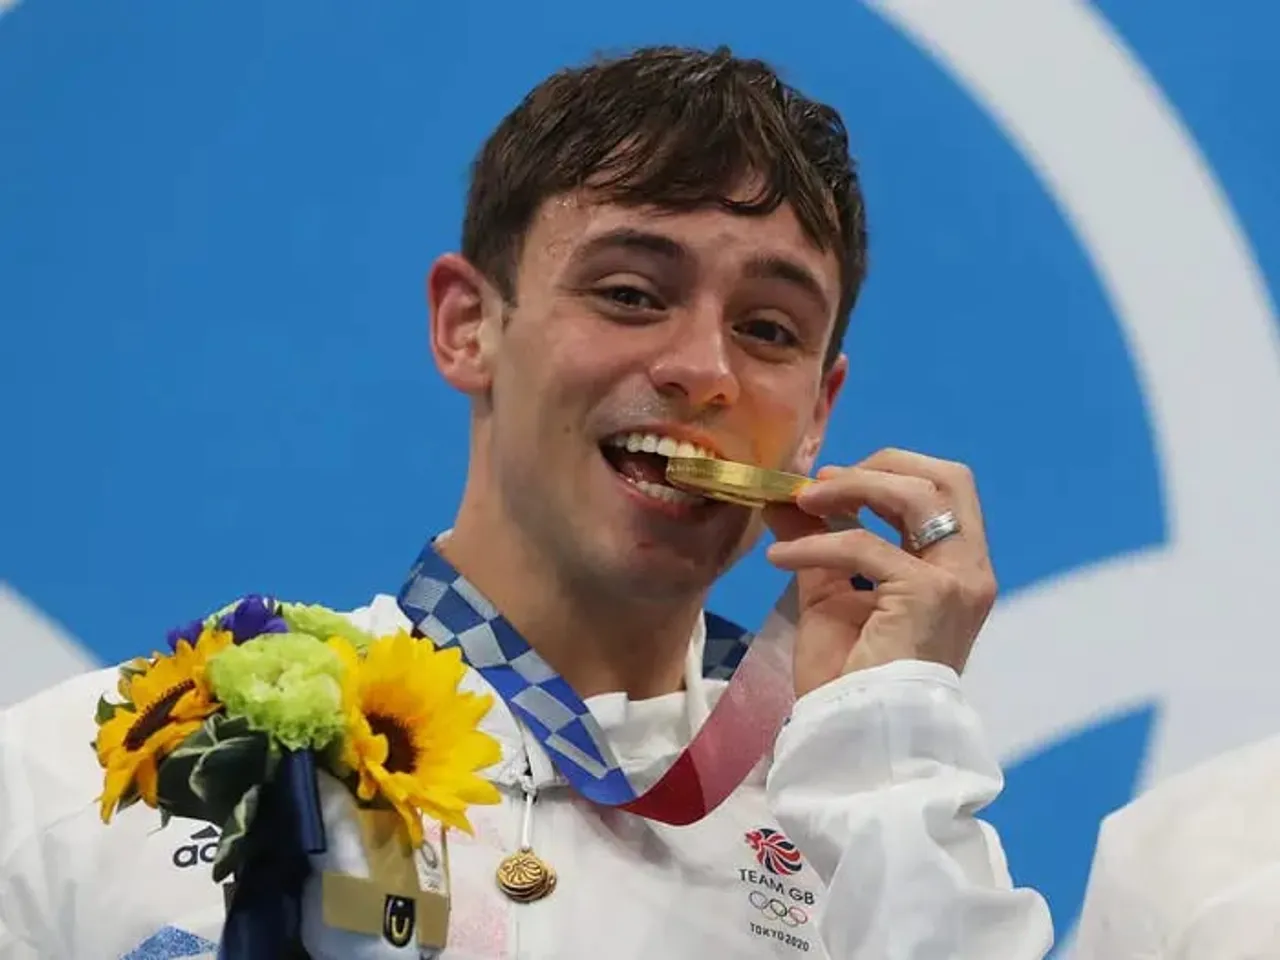 Tom Daley: The "Proud Gay-Olympian" showering love in Tokyo Olympics